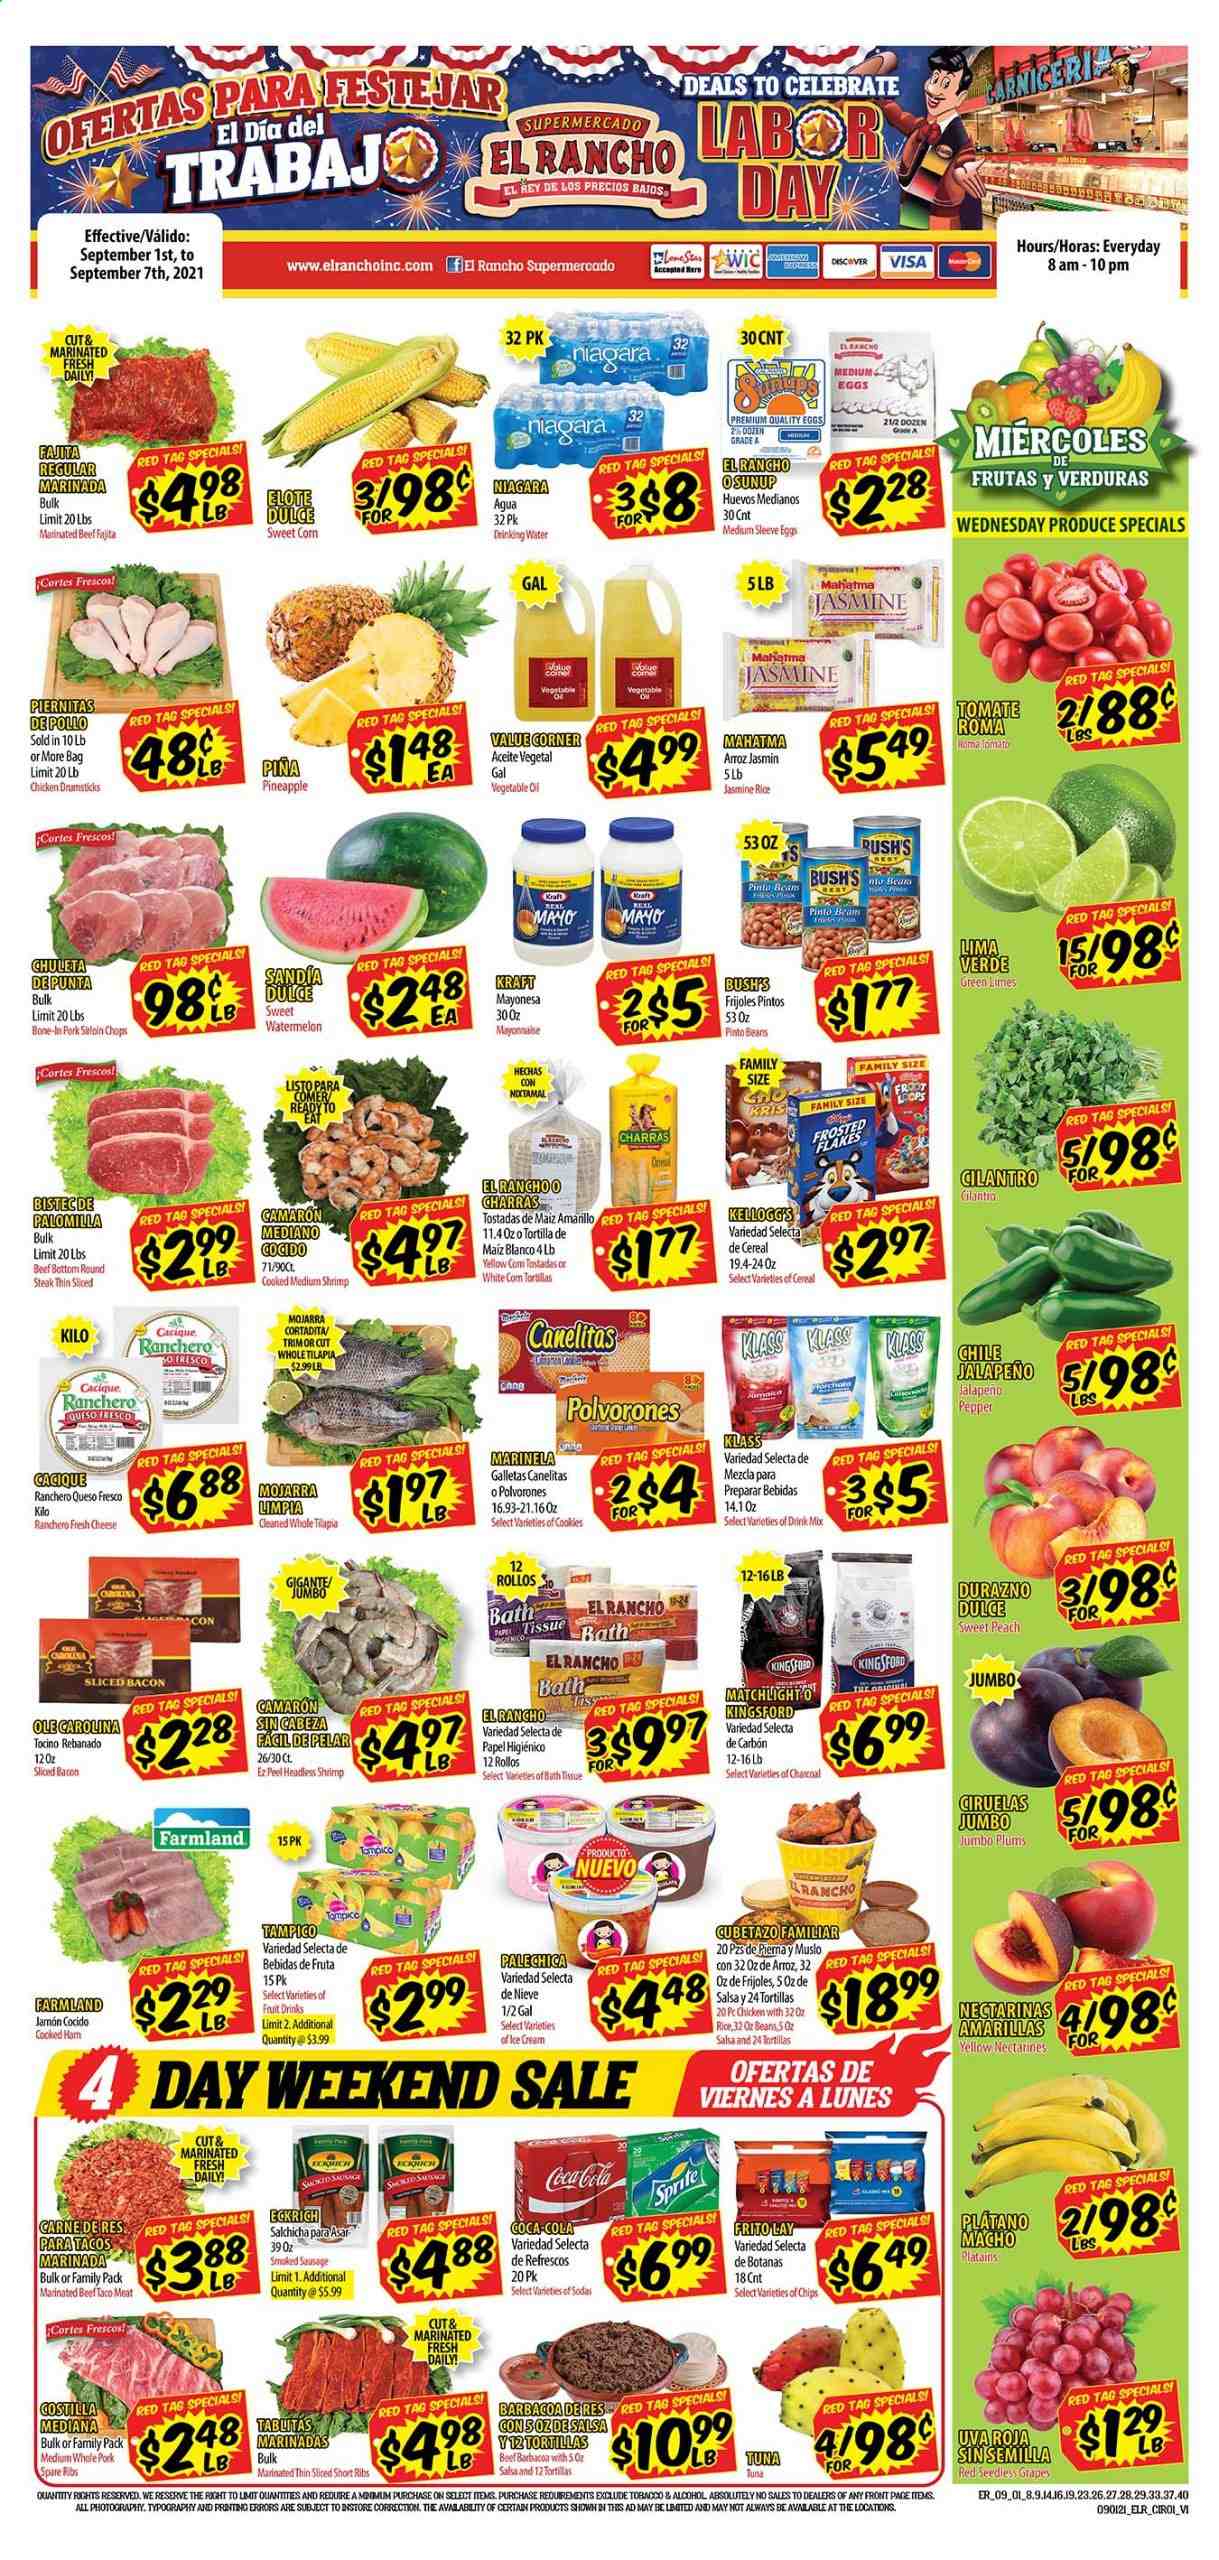 thumbnail - El Rancho Flyer - 09/01/2021 - 09/07/2021 - Sales products - seedless grapes, plums, tortillas, tostadas, beans, corn, tomatoes, jalapeño, sweet corn, grapes, limes, watermelon, pineapple, tilapia, tuna, shrimps, fajita, Kraft®, bacon, cooked ham, ham, sausage, smoked sausage, queso fresco, cheese, eggs, mayonnaise, cookies, chips, pinto beans, cereals, rice, jasmine rice, cilantro, salsa, Coca-Cola, fruit punch, alcohol, chicken drumsticks, beef meat, steak, round steak, marinated beef, pork loin, pork meat, pork ribs, pork spare ribs, nectarines. Page 1.